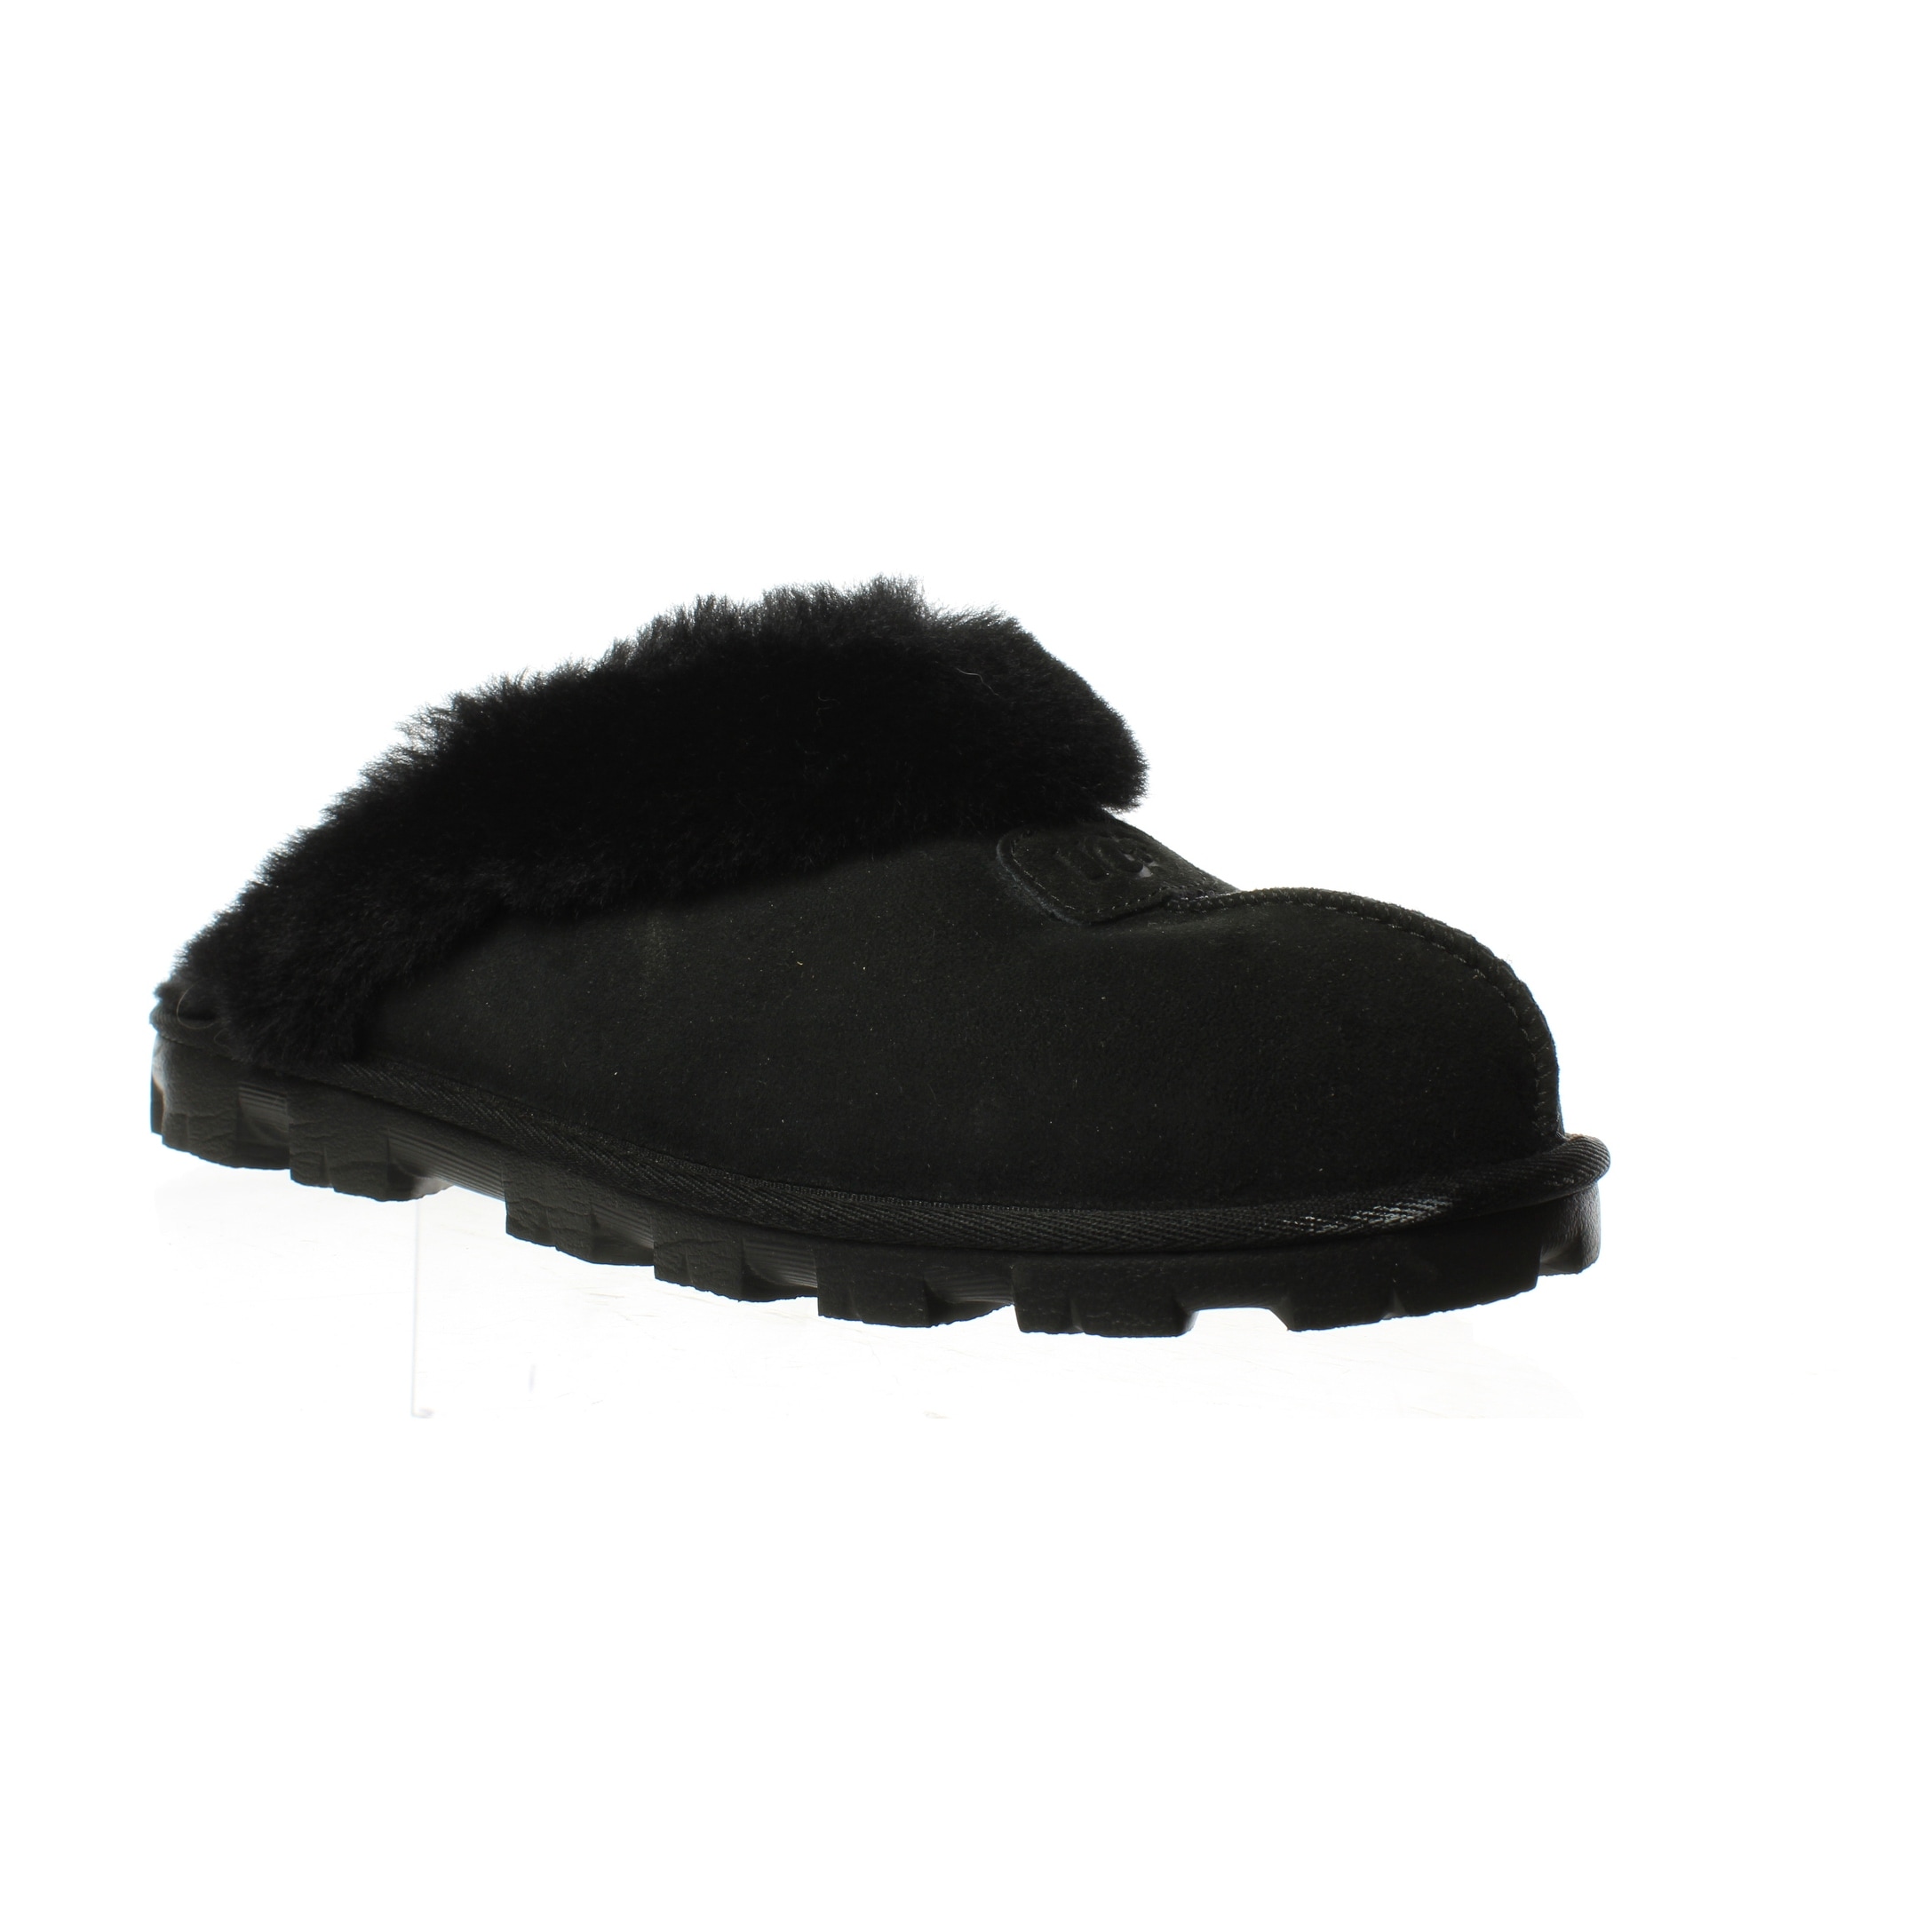 ugg slippers size 12